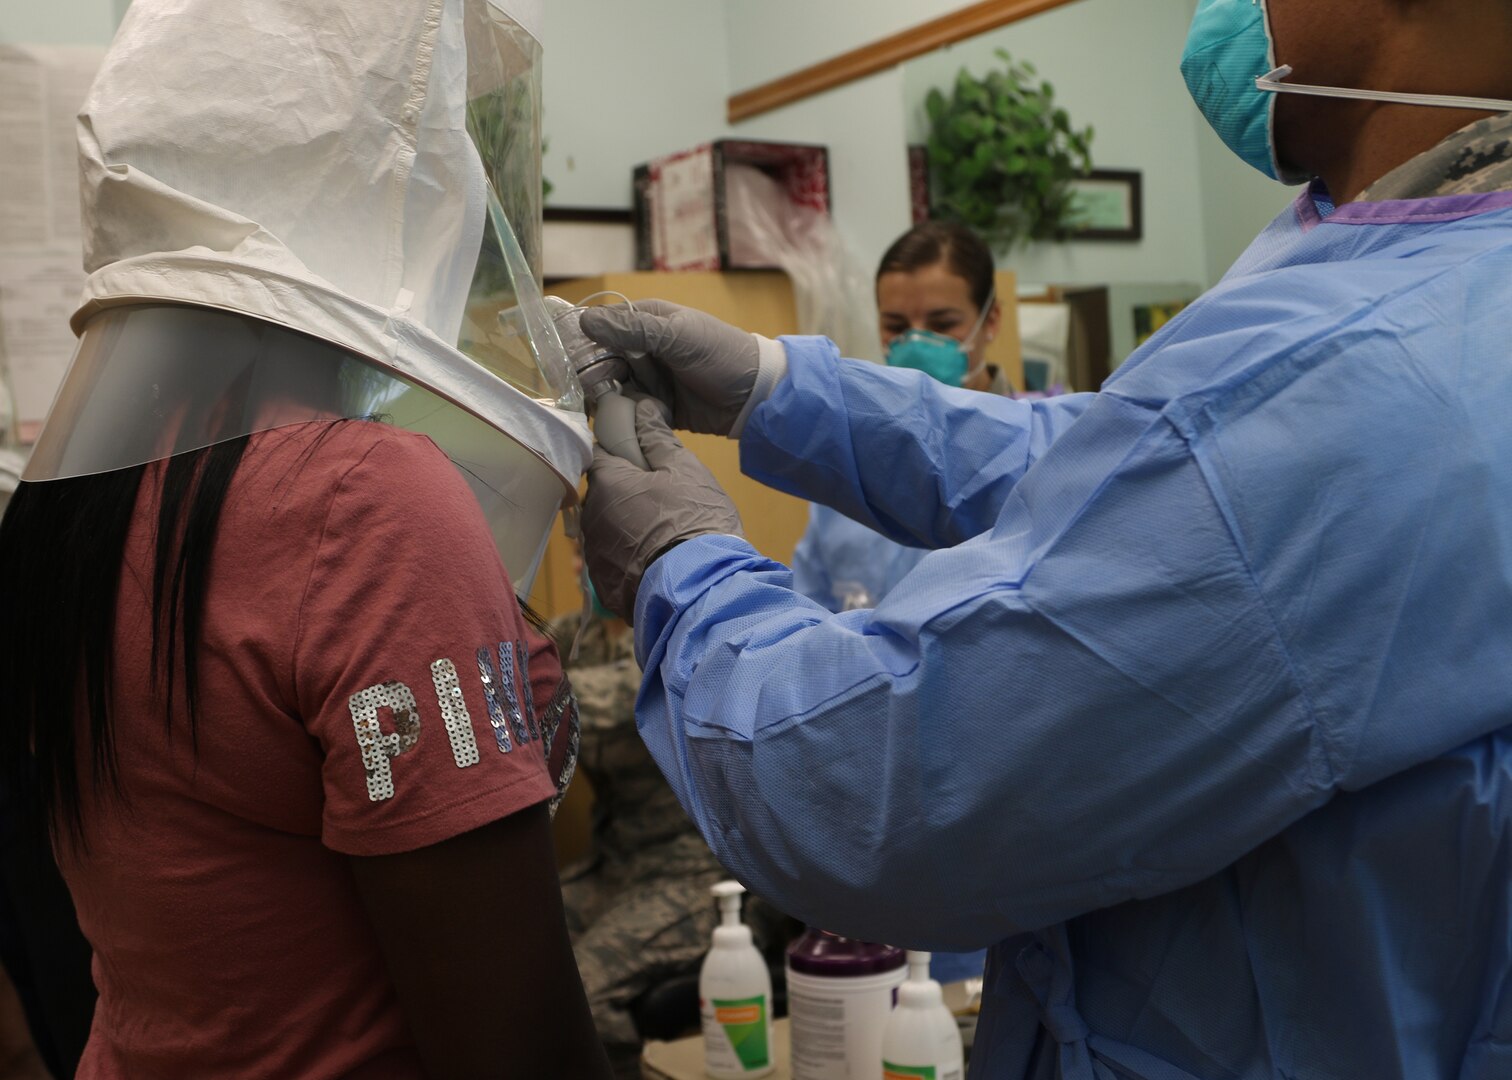 Airman 1st Class Traevonne Greene, 190th Air Refueling Wing, Kansas Air National Guard health service technician, sprays a non-toxic test solution into the hood of Latasha Benfer, medication aide for Homestead of Topeka, to test the N95 protective masks’ ability to filter airborne particles during a fit test demonstration at Homestead of Topeka in Topeka, Kansas, May 6, 2020.